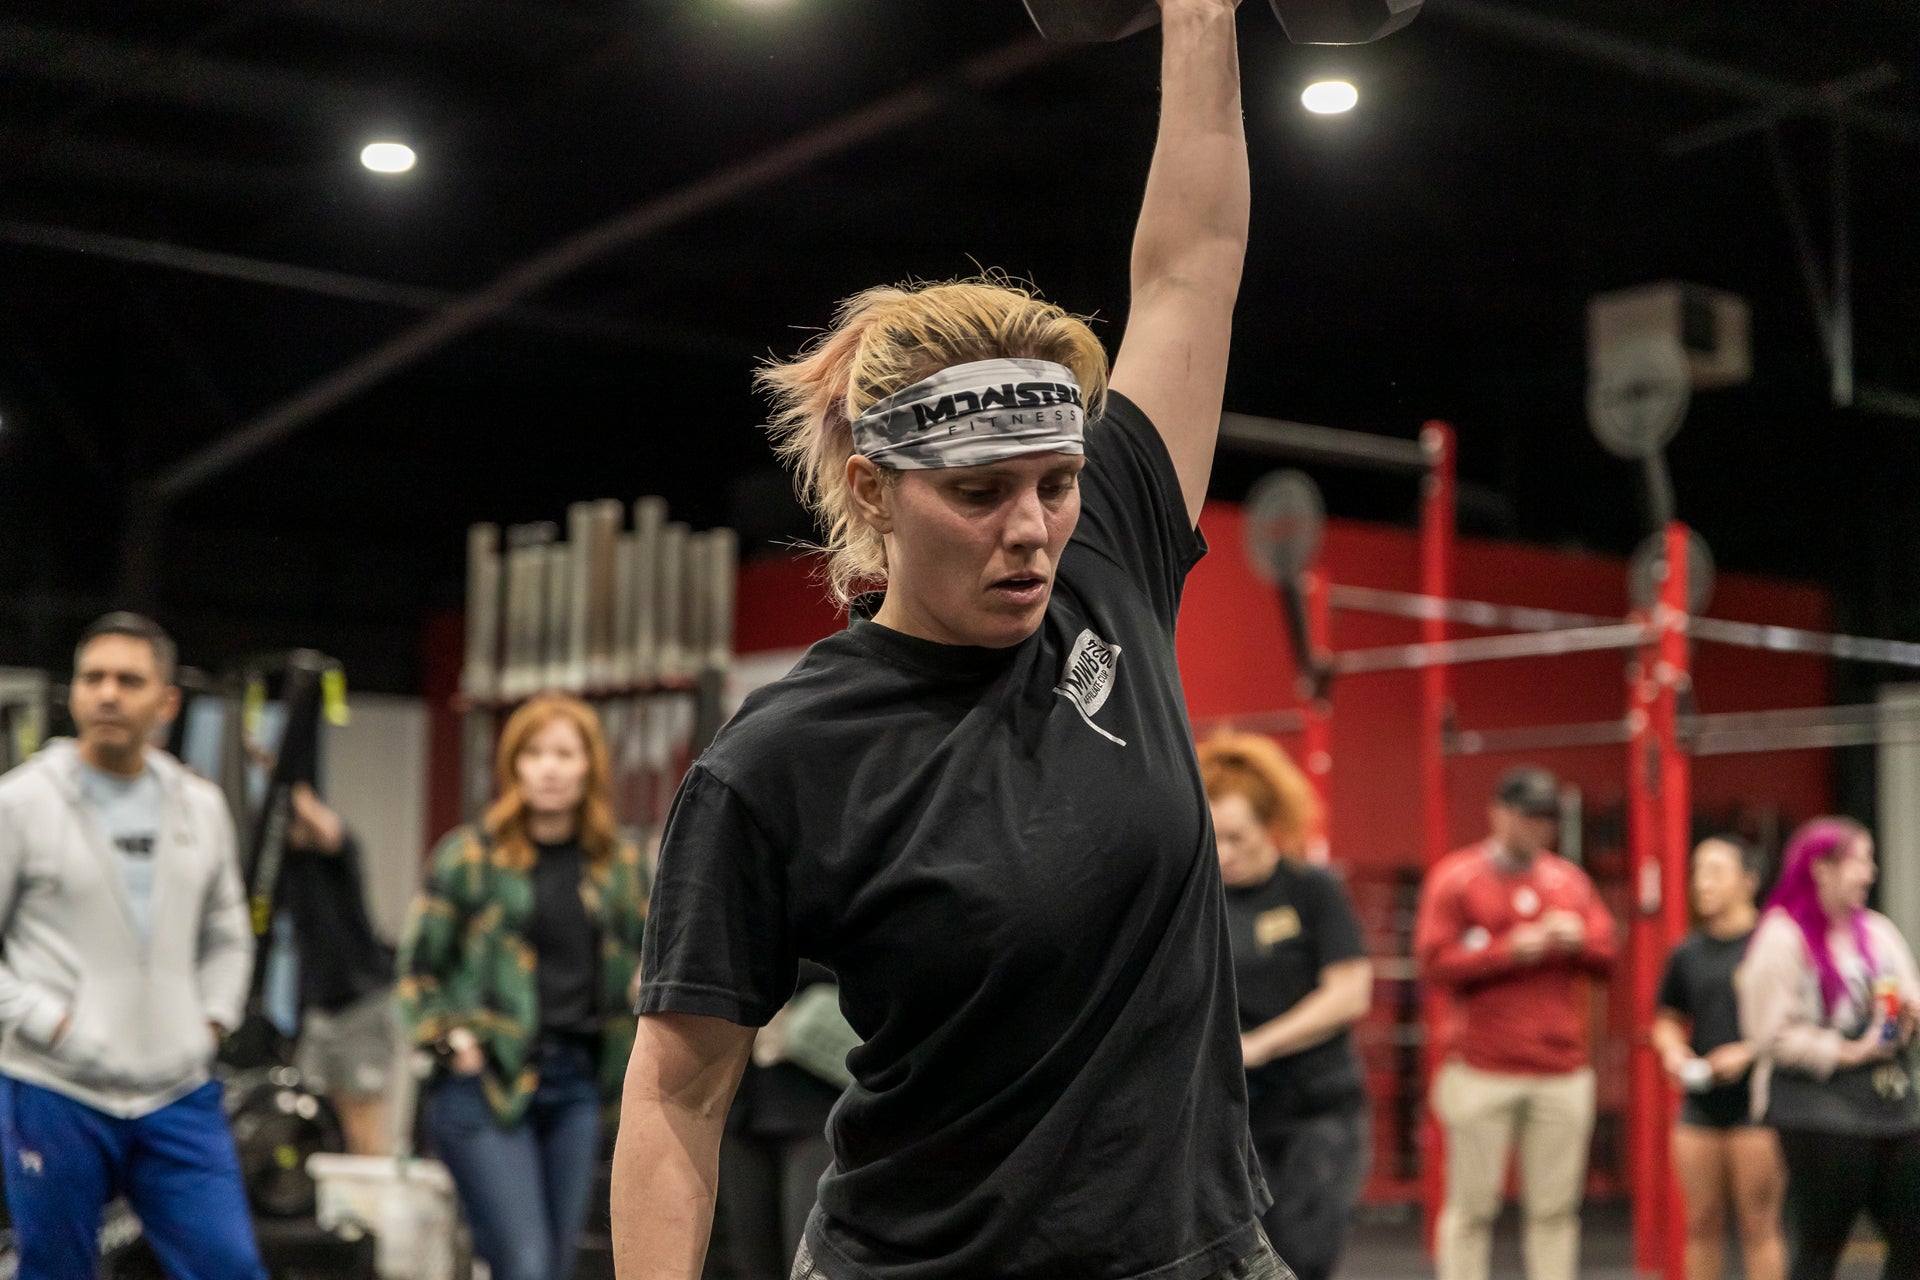 Image of woman working out in headband headband